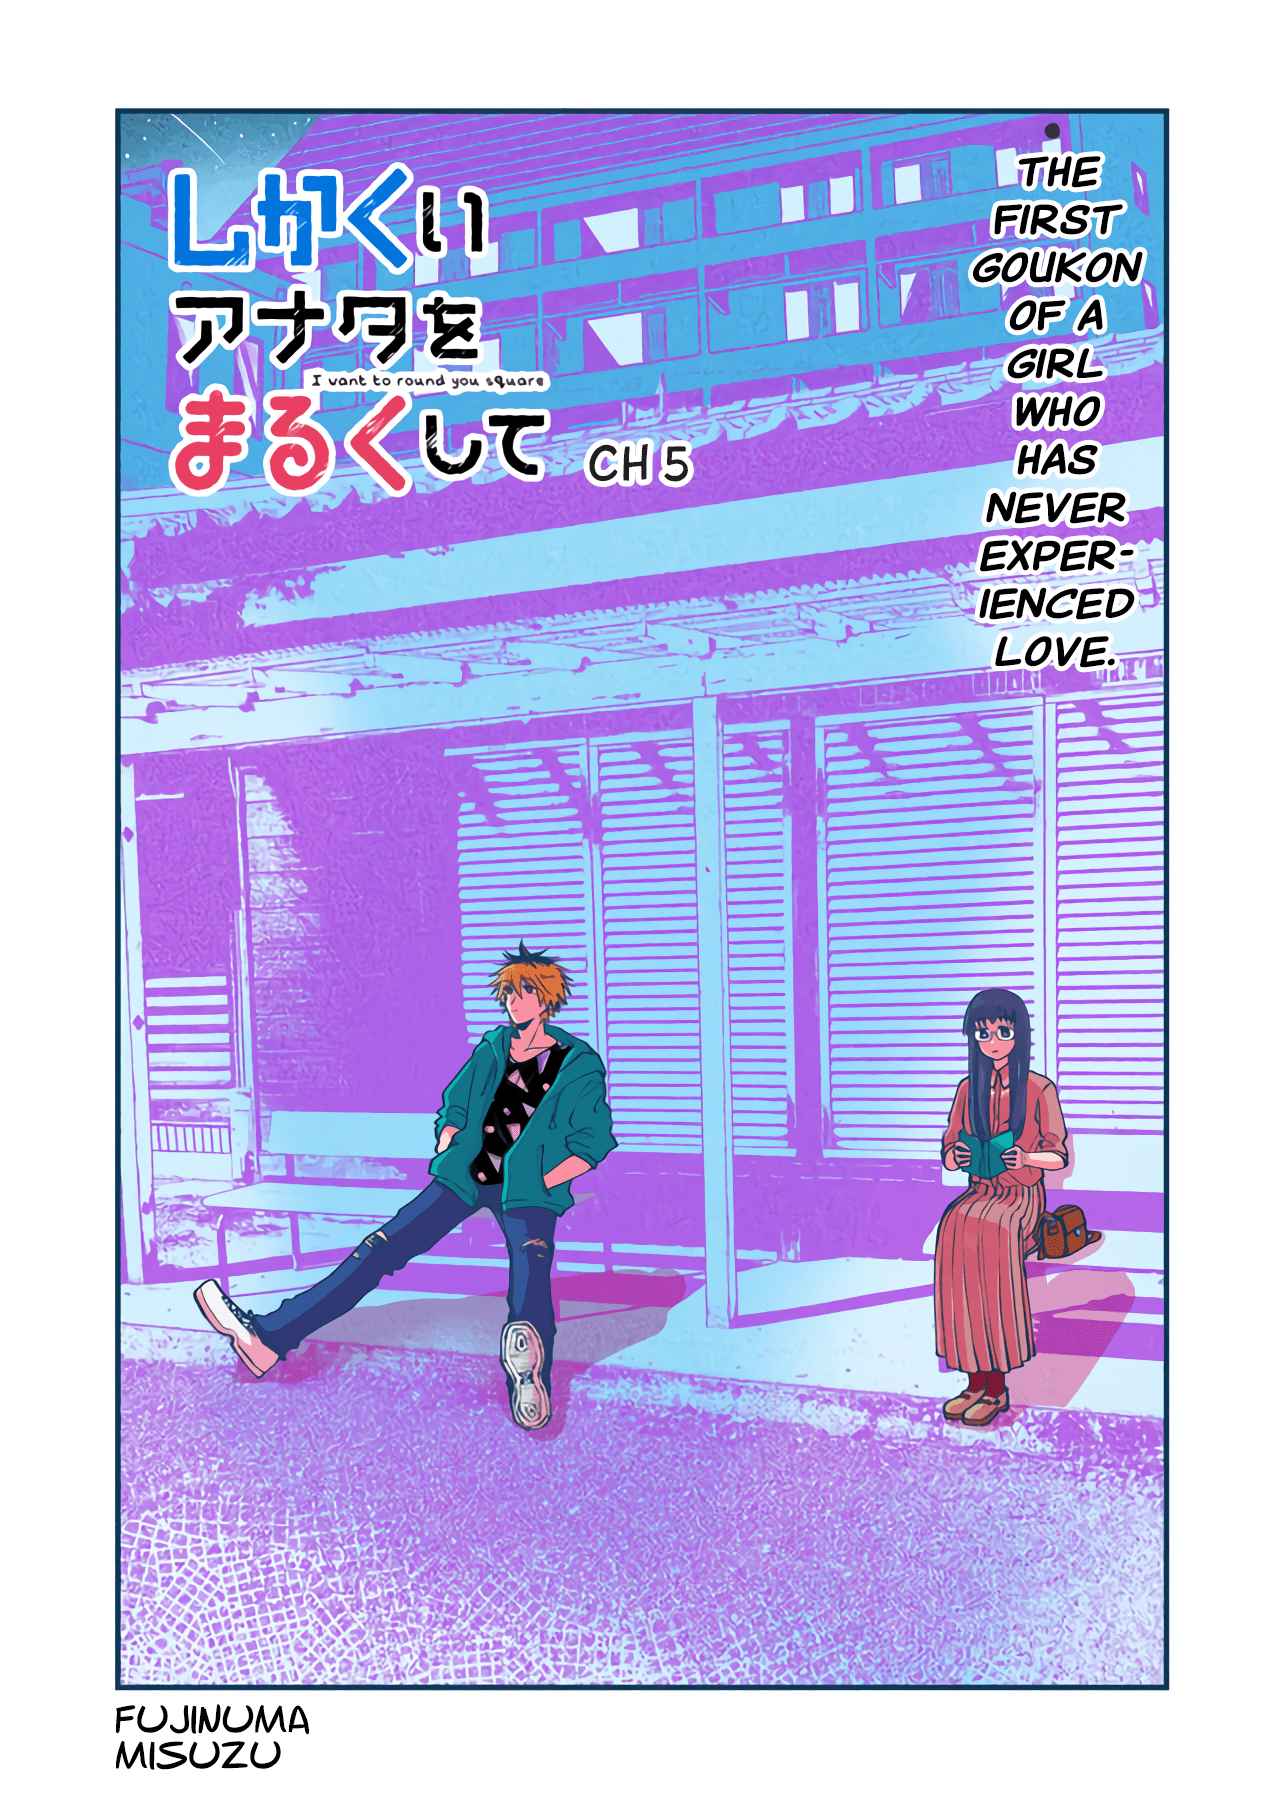 I Want to Round You Square Ch. 5 The first goukon of a girl who has never experienced love.